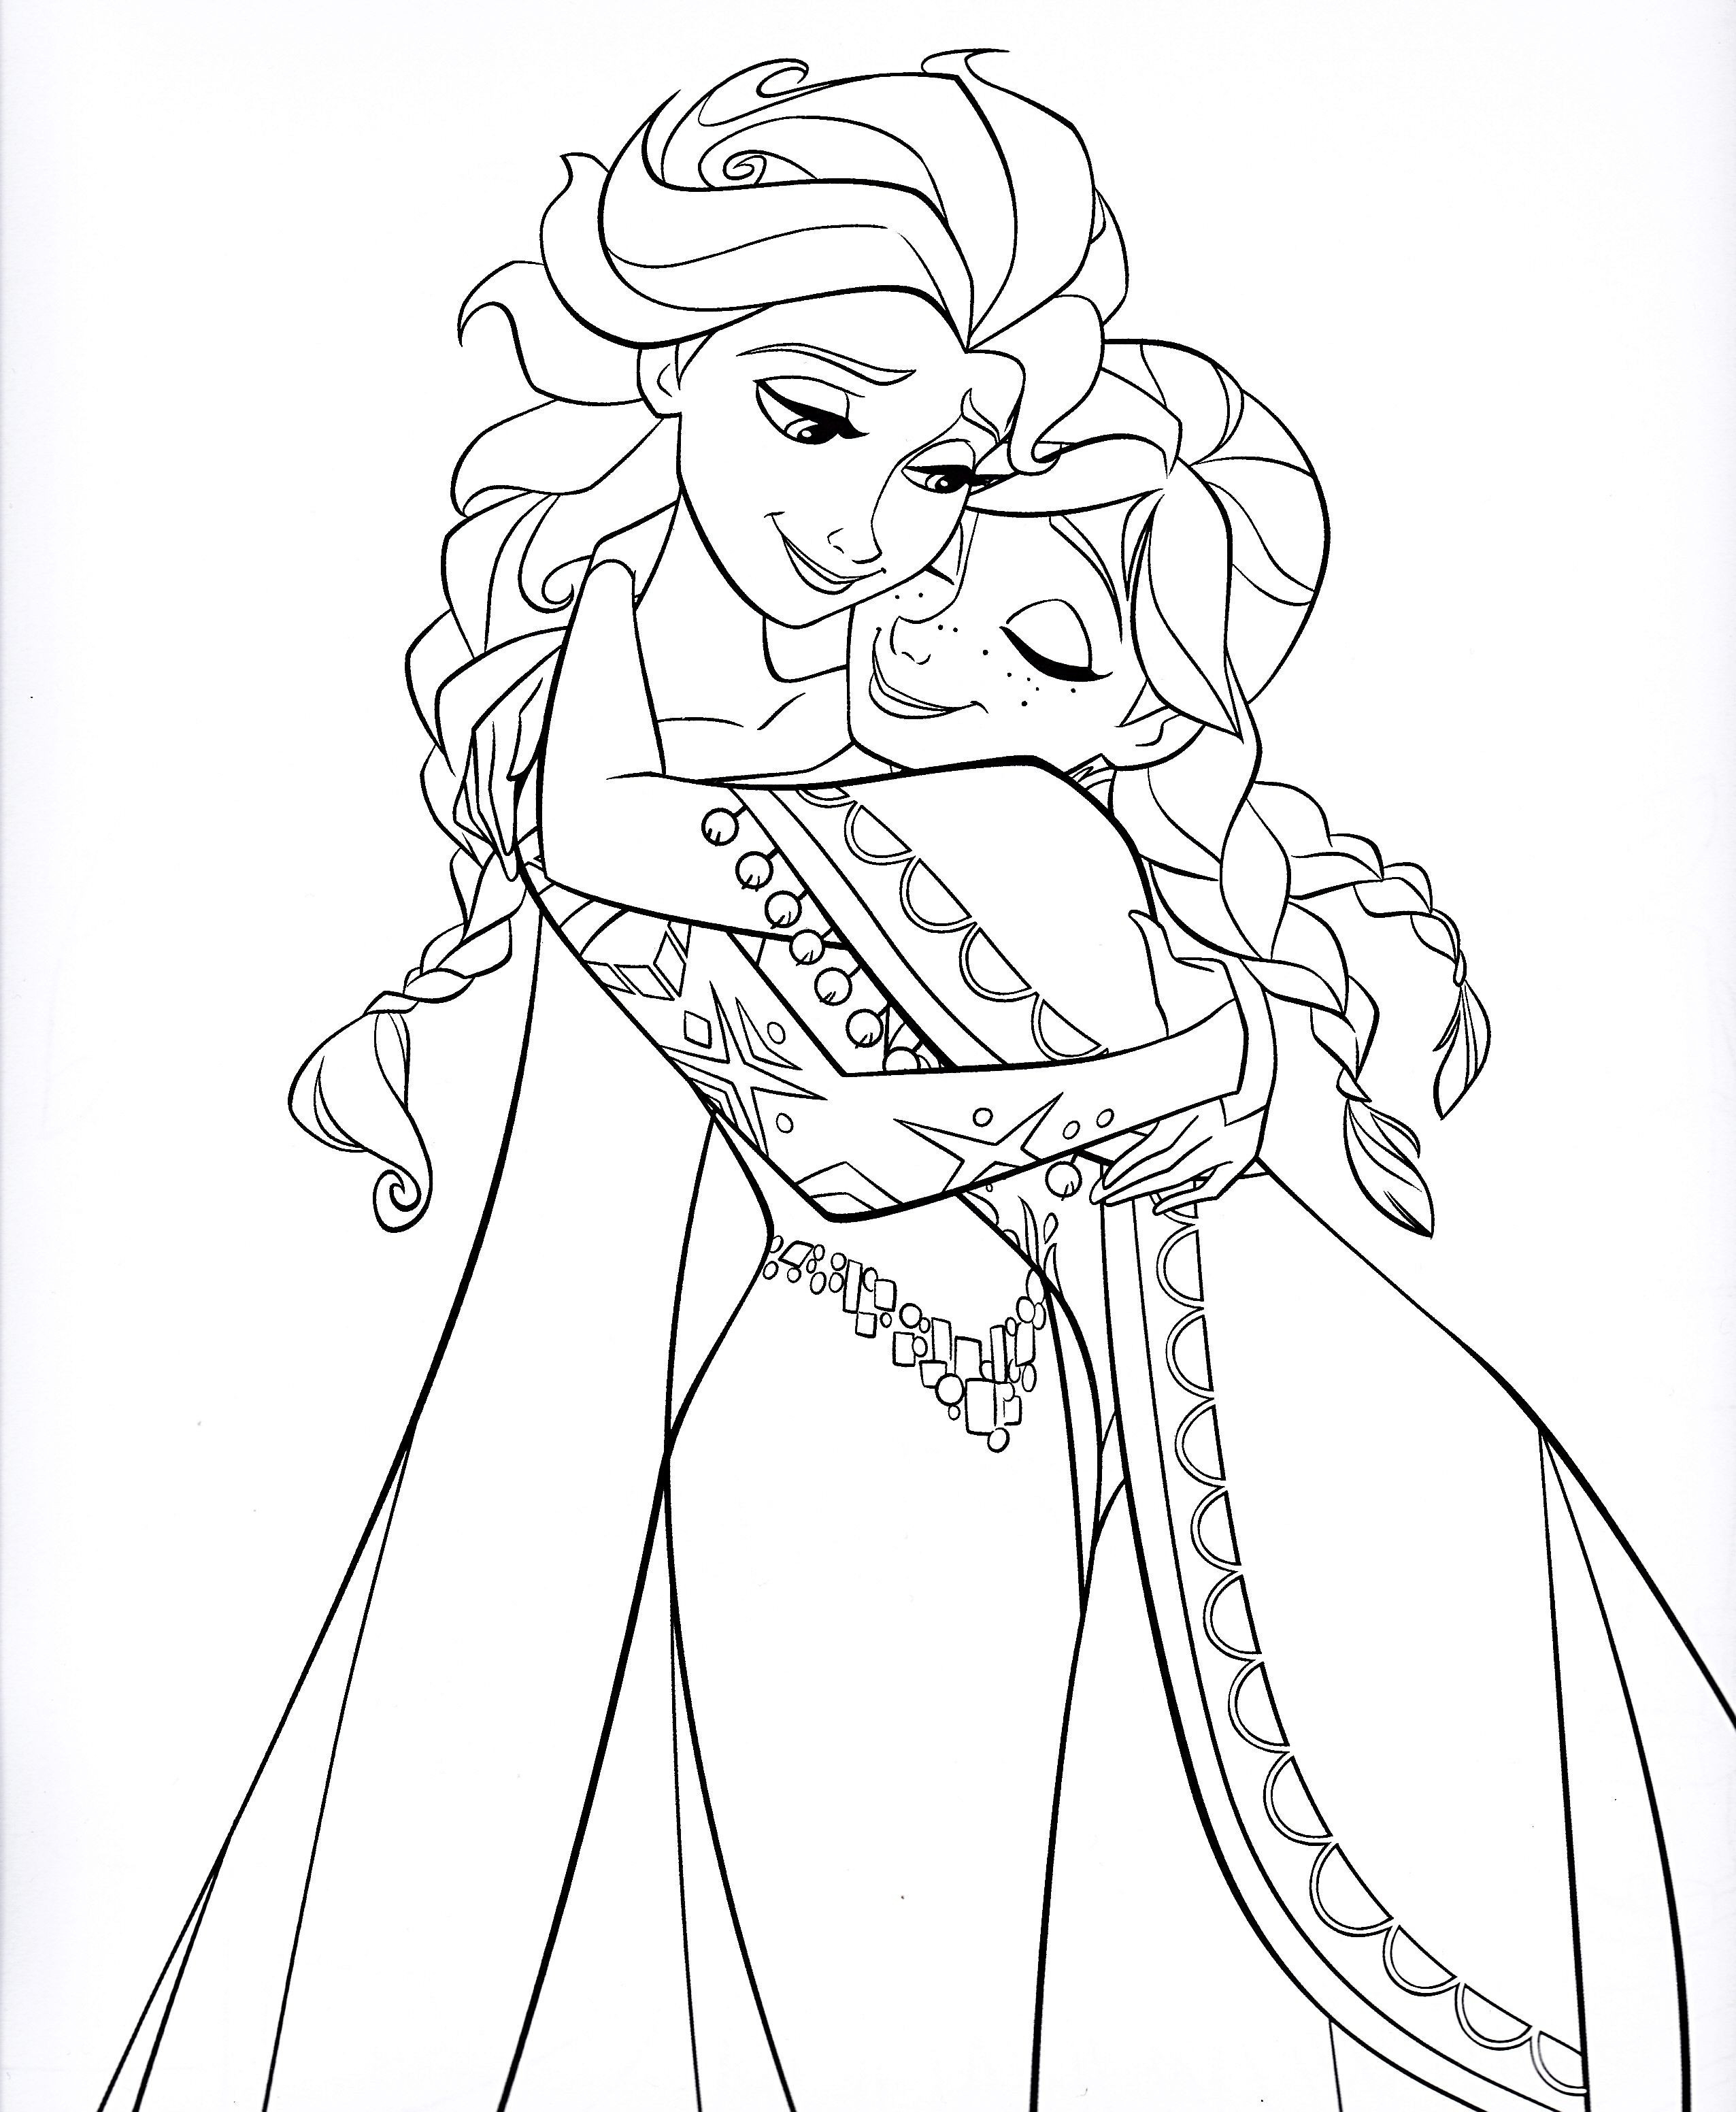 Coloring Pages For Girls Frozen Coloring Pages Elsa Frozen Games Mafa Free For Kids To Play Online